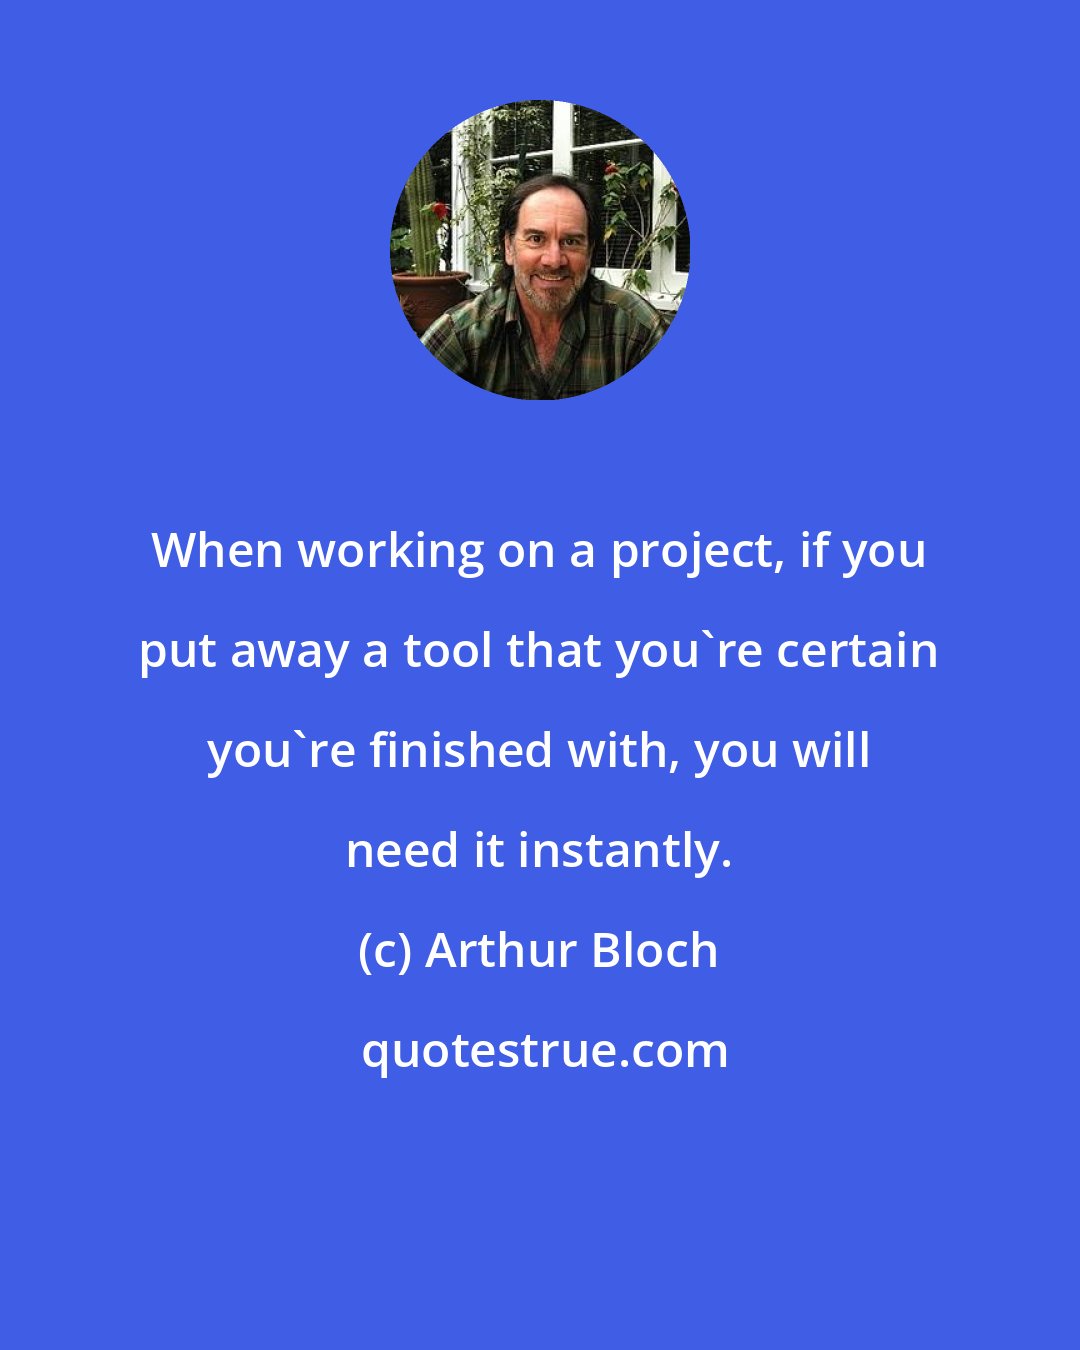 Arthur Bloch: When working on a project, if you put away a tool that you're certain you're finished with, you will need it instantly.